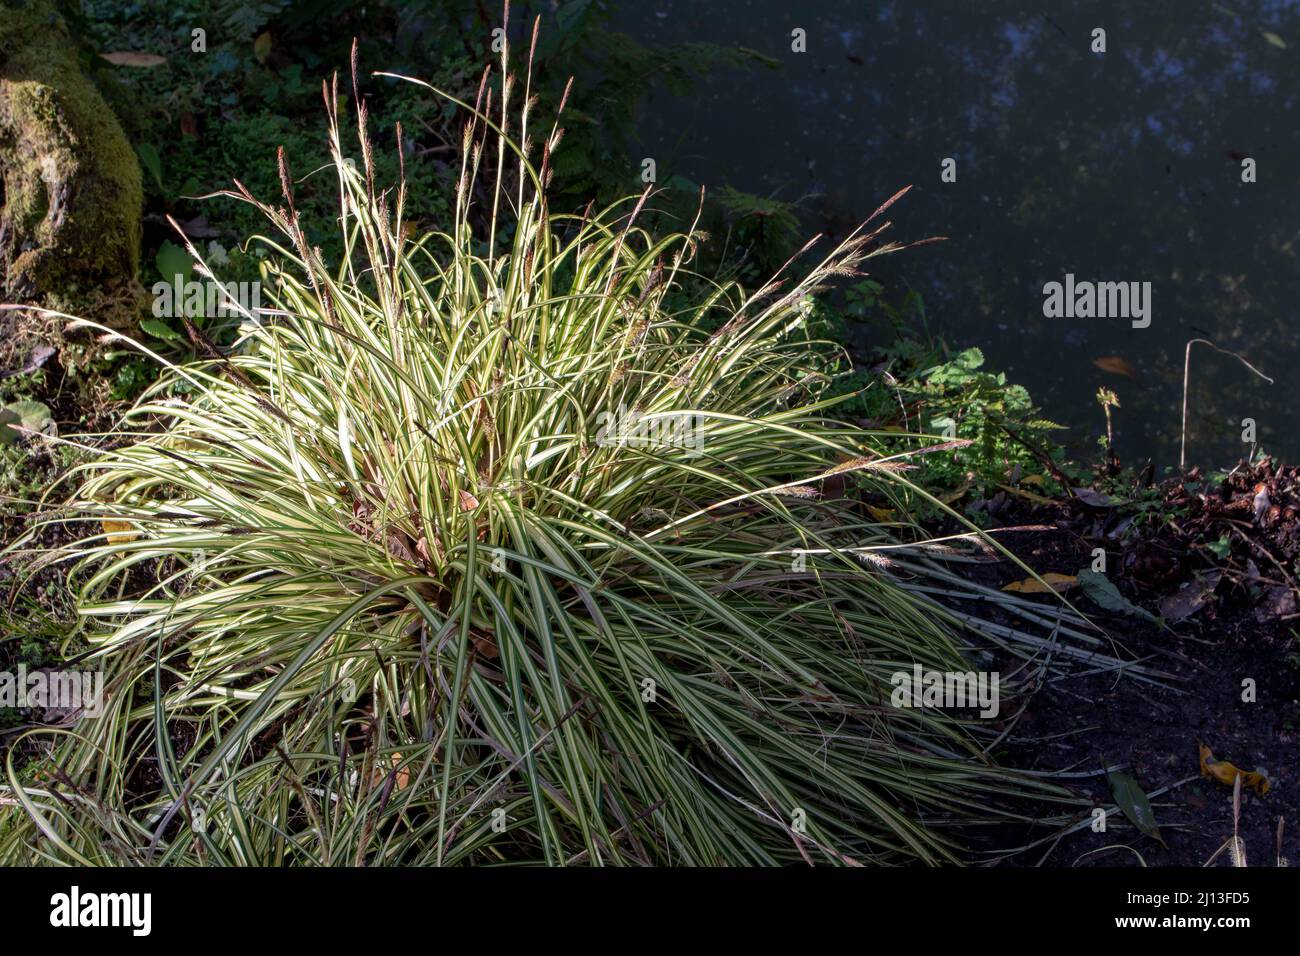 Variegated japanese sedge plant with yellow green striped leaves and spikes. Carex hachijoensis. Stock Photo